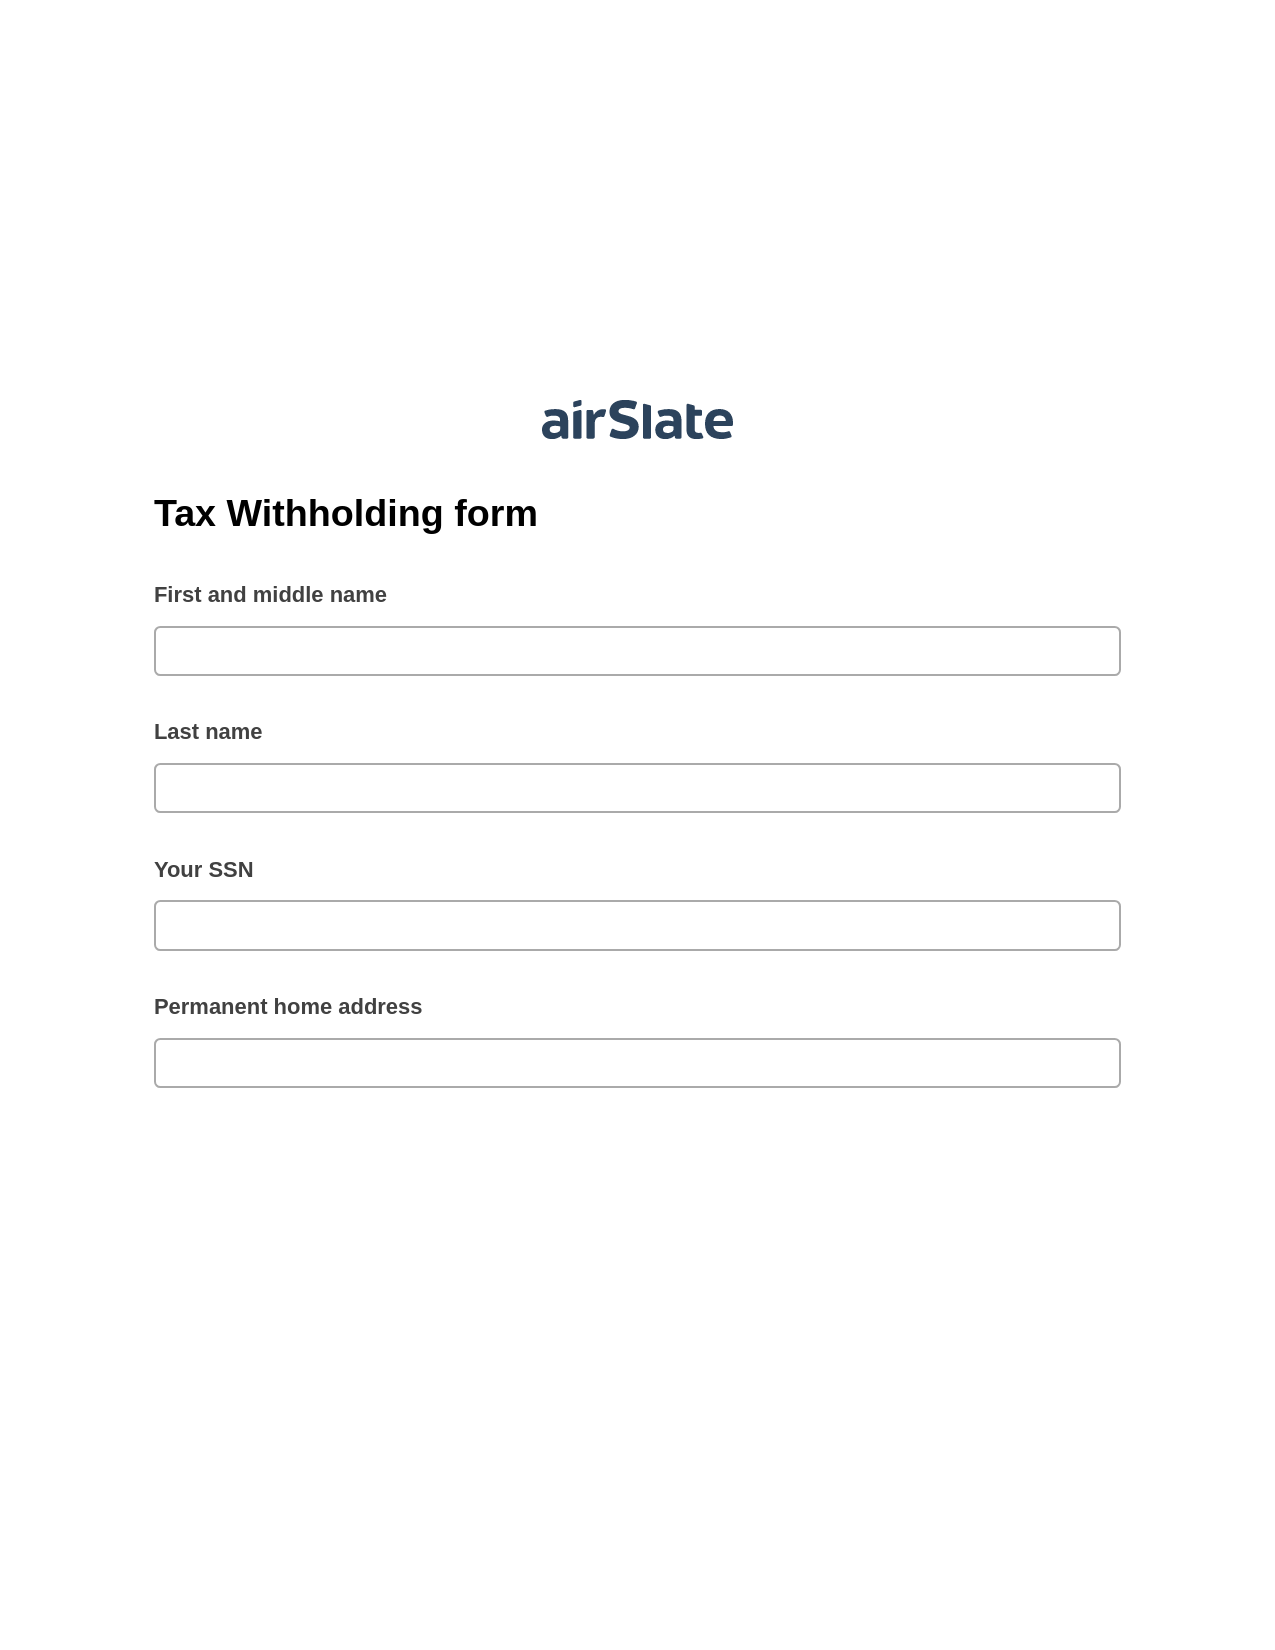 Tax Withholding form Pre-fill Slate from MS Dynamics 365 Records Bot, Assign Roles to Recipients Bot, Box Bot